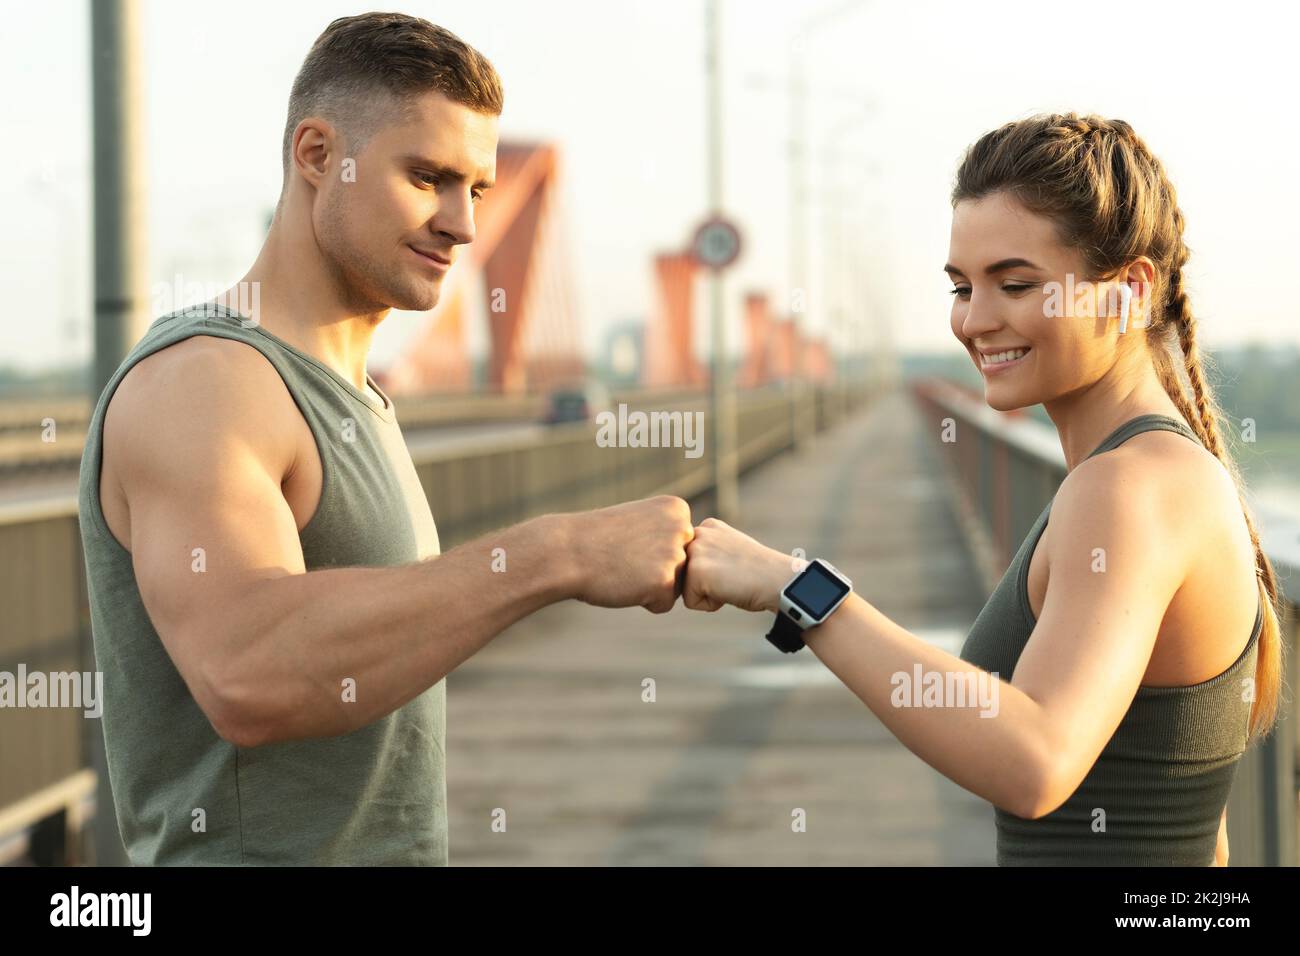 Athletic couple making fist bump gesture during fitness workout on city street Stock Photo